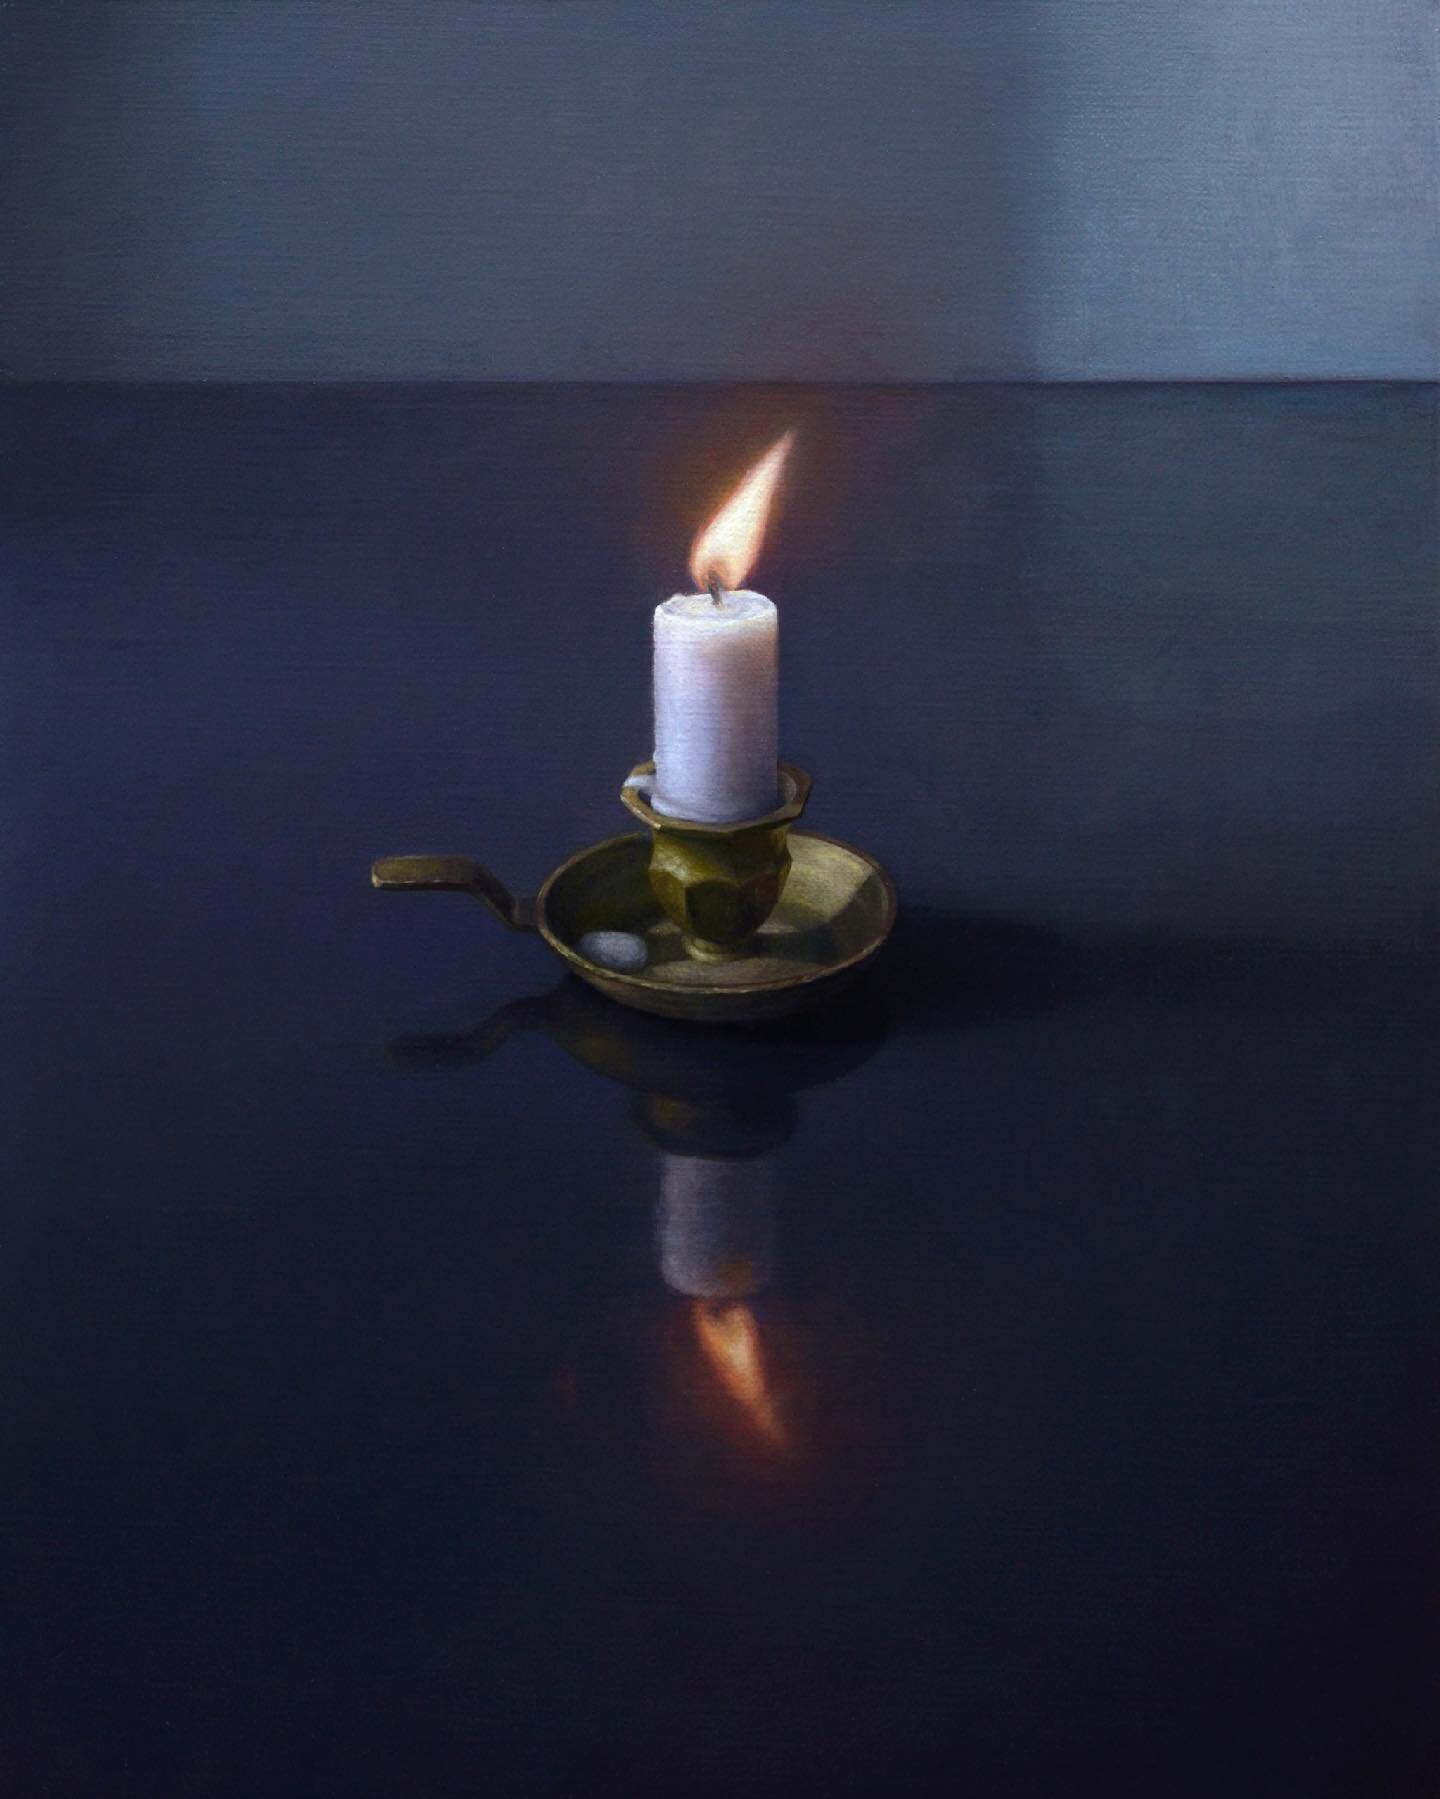 Candle on Black Table, oil on linen mounted to aluminum panel, 11&rdquo; x 14&rdquo;
.
This painting is shipping tomorrow to @winfieldgallery gallery in CA.  Safe travels ✨
.

#davidstangerstudio #davidstanger #winfieldgallery #oilpainting #naturamor